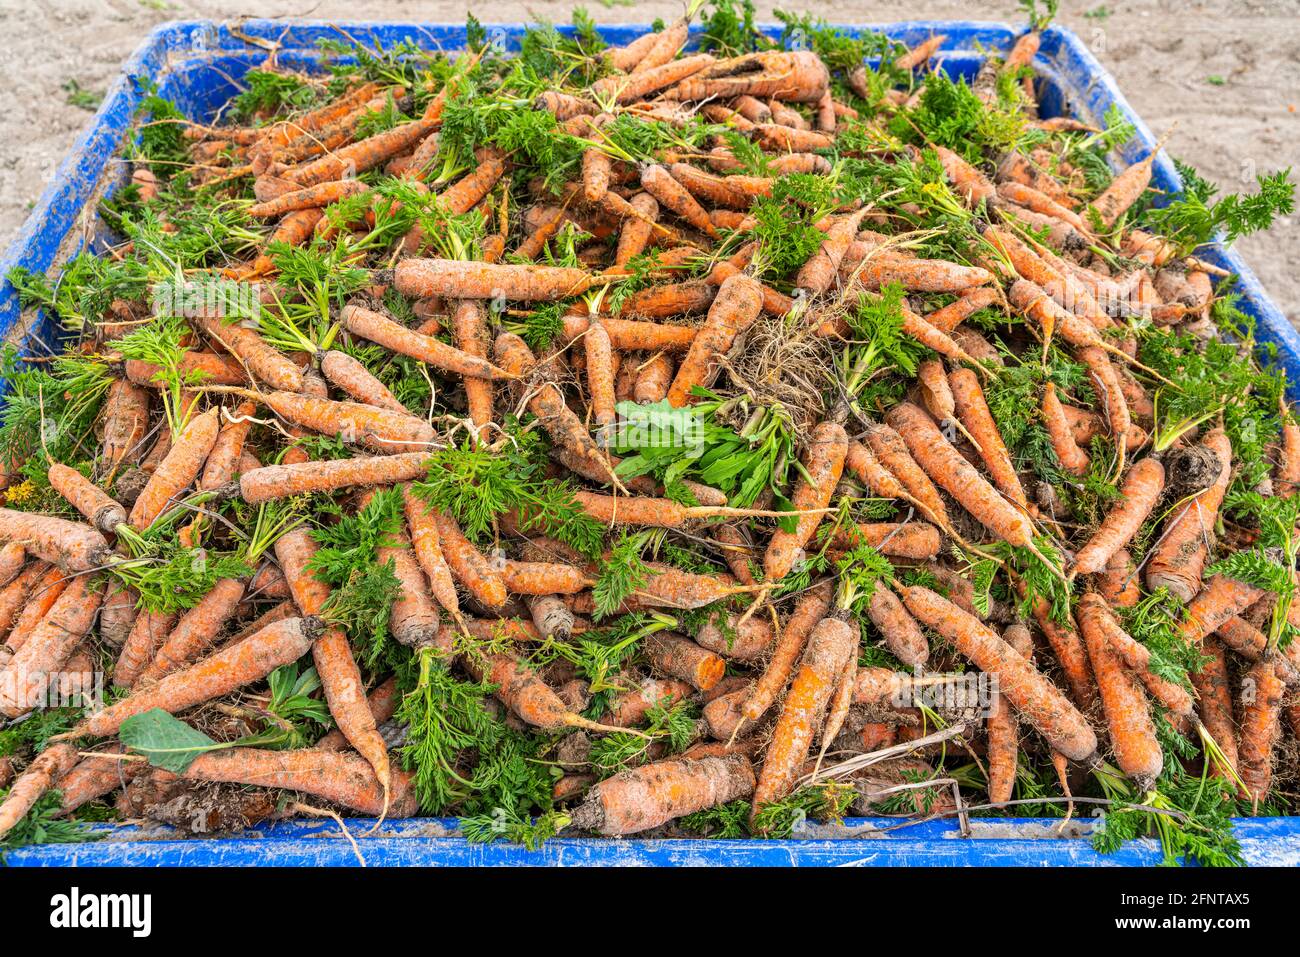 Carrots just picked from the ground and stowed in crates. Fucino, Abruzzo, Italy, Europe Stock Photo